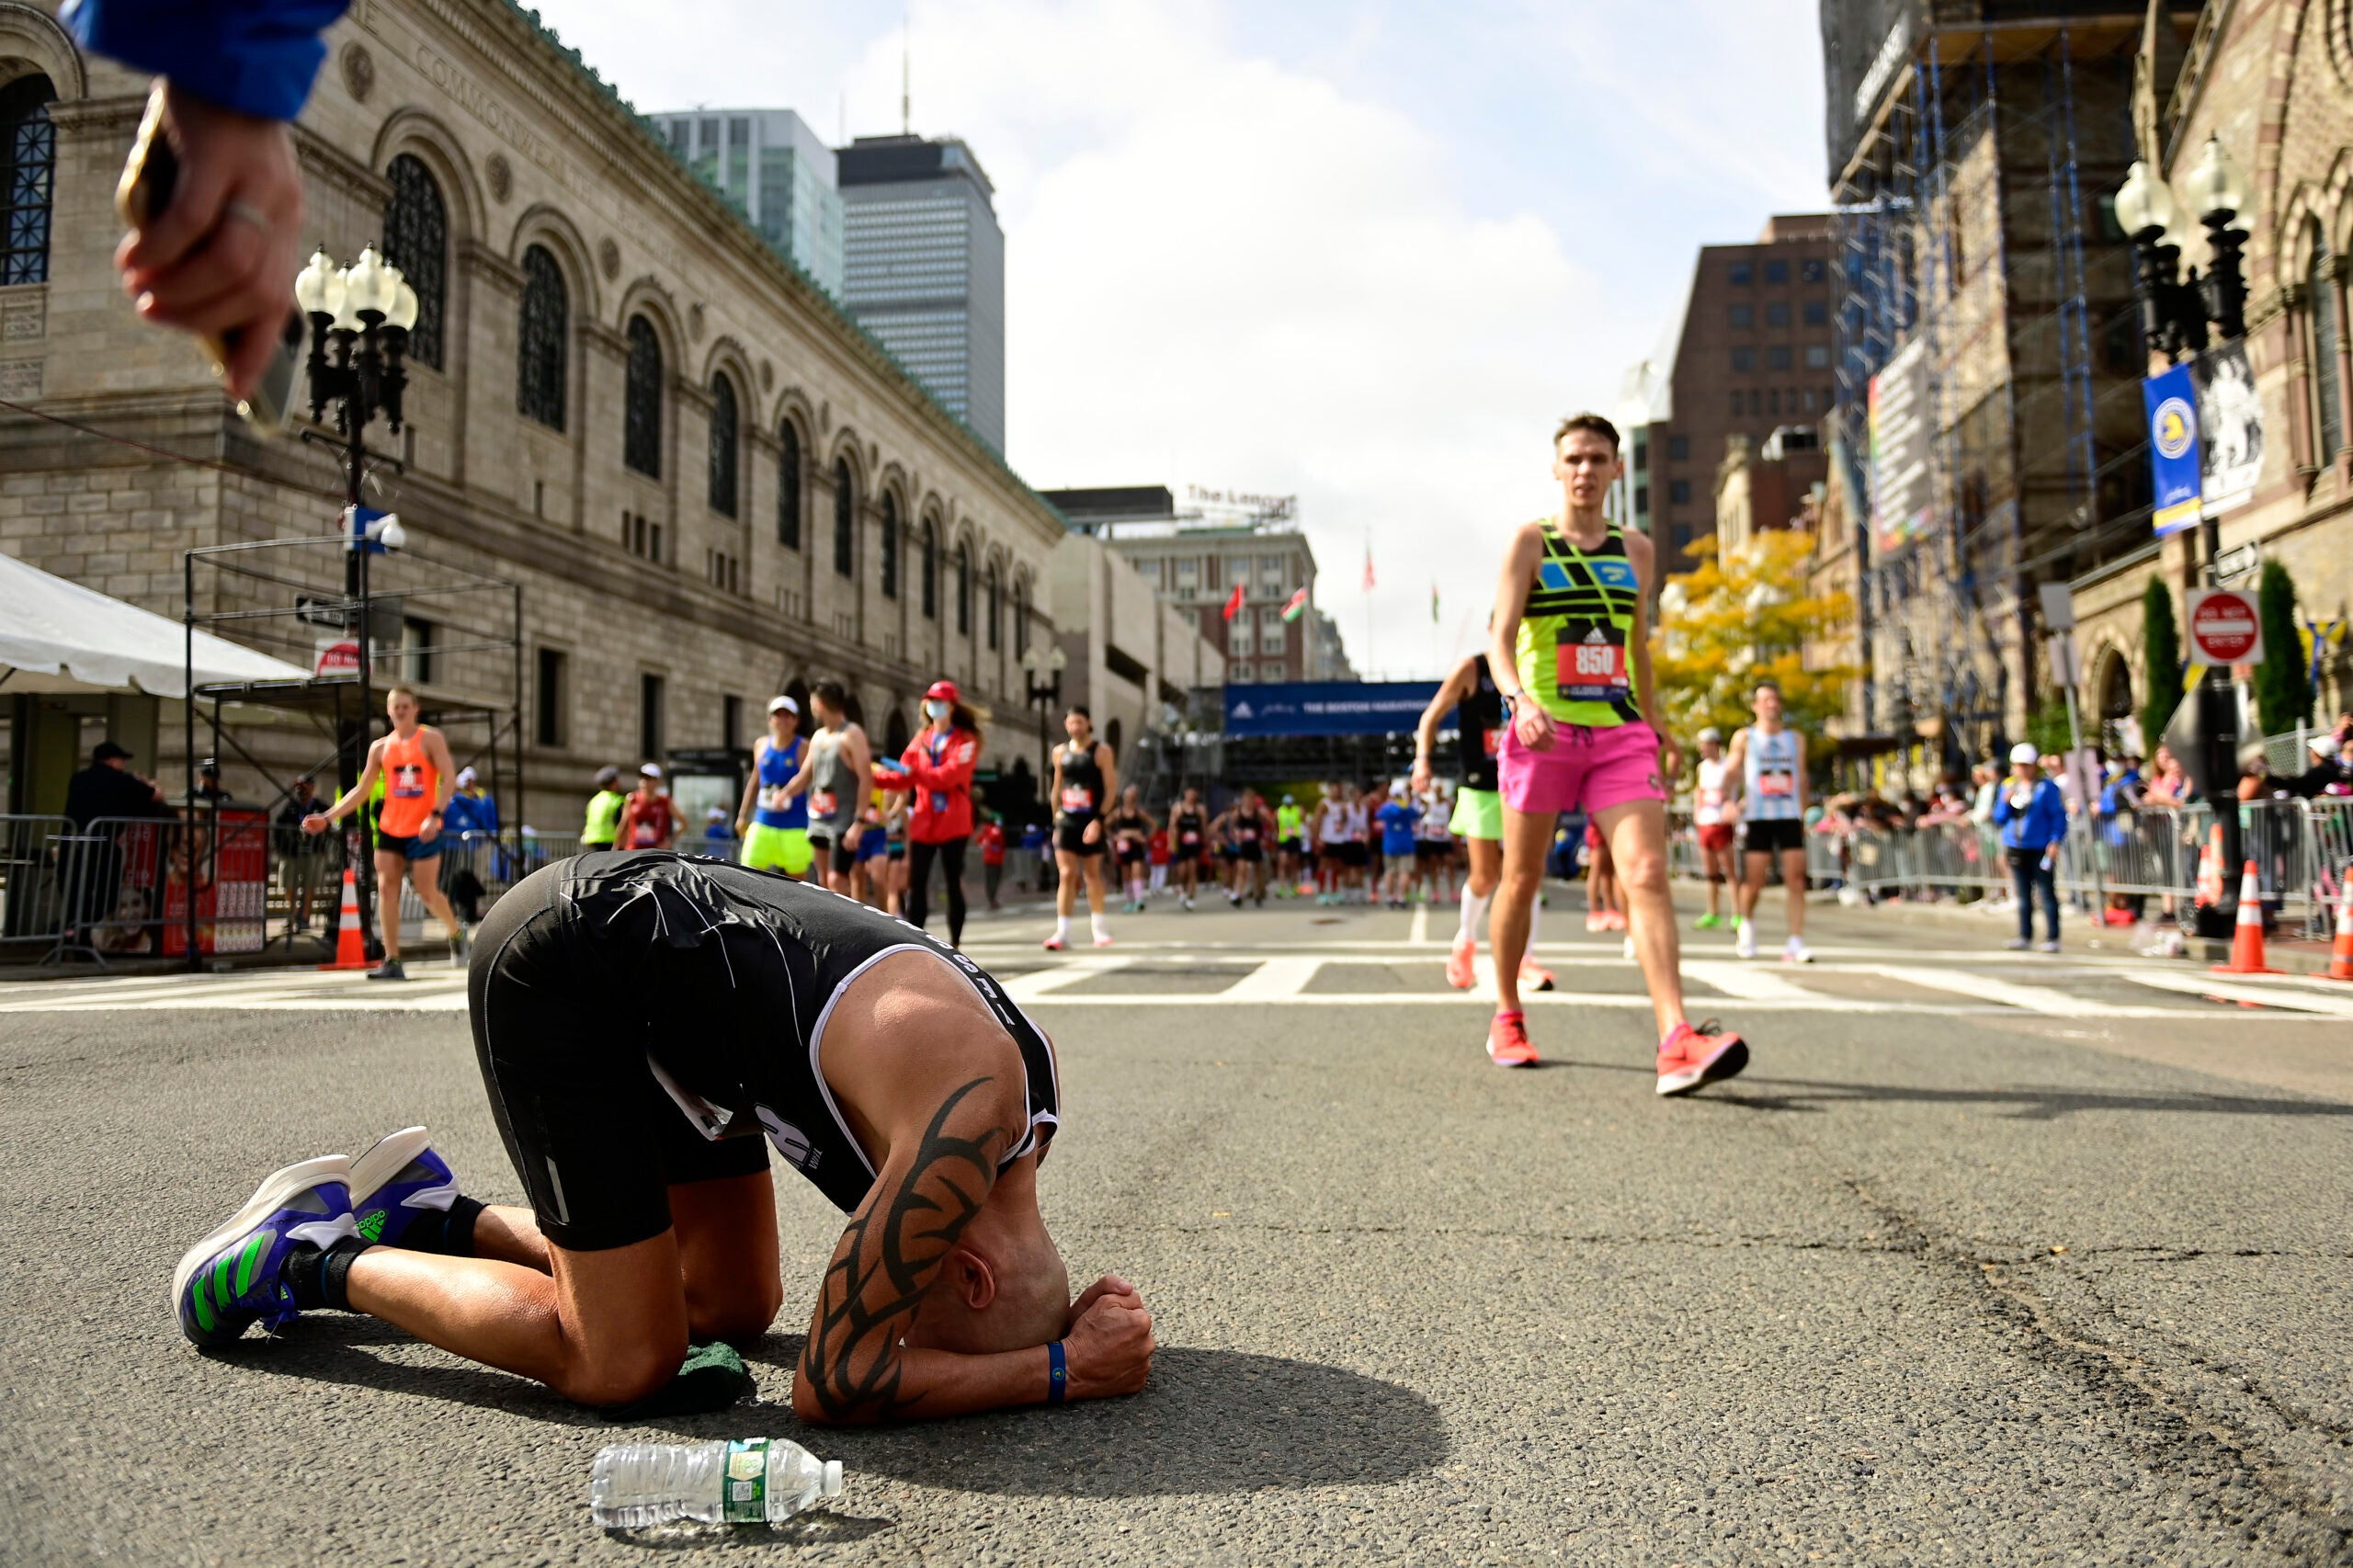 26 photos showing the pure joy and utter exhaustion at the 2021 Boston